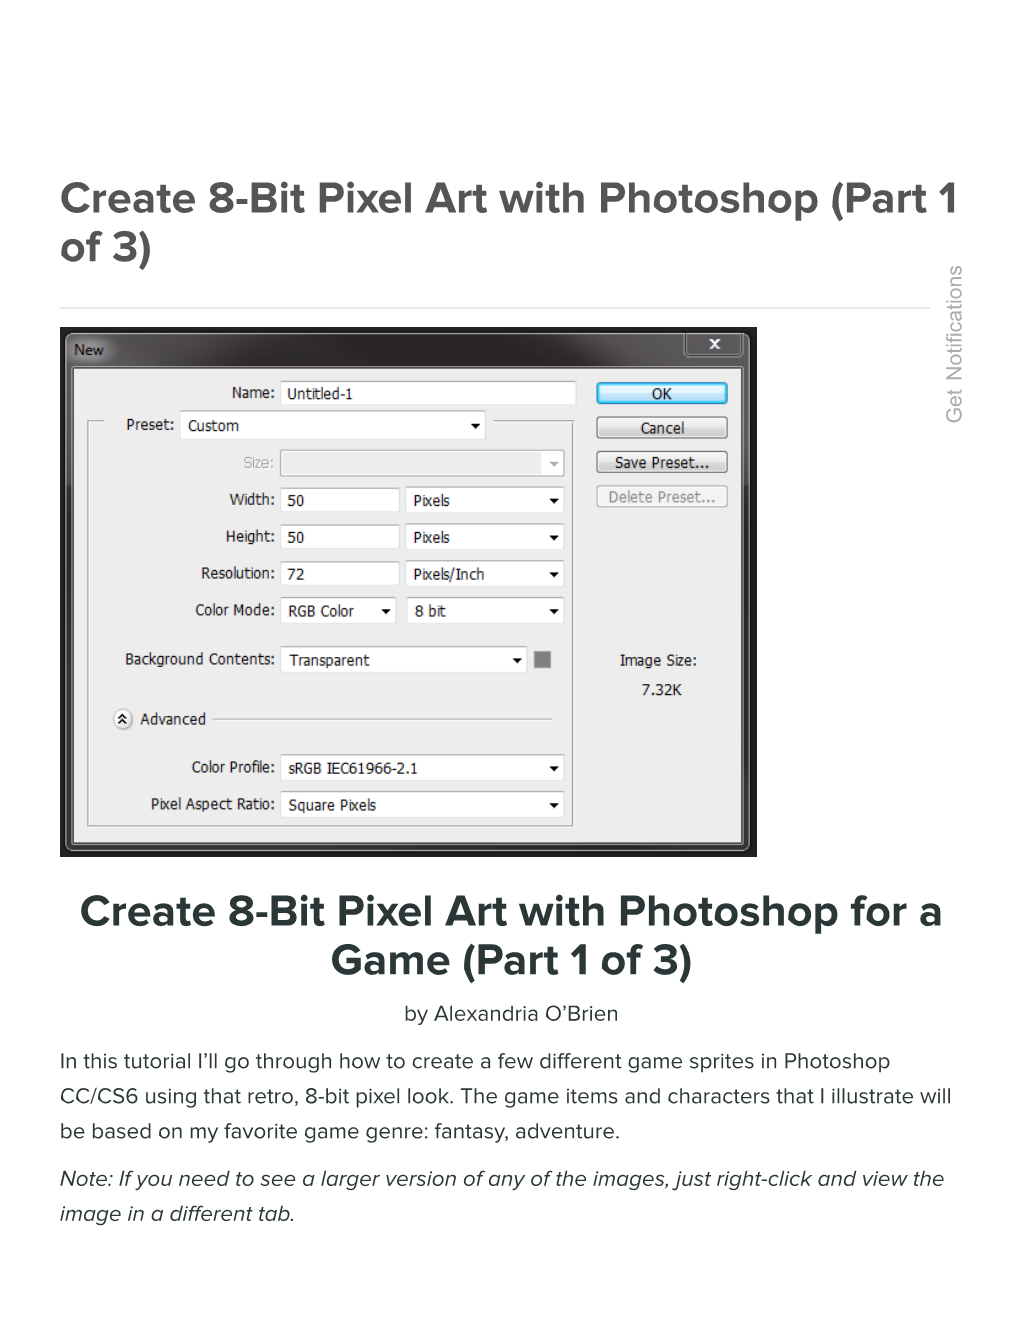 (Part 1 of 3) Create 8-Bit Pixel Art with Photoshop for a Game